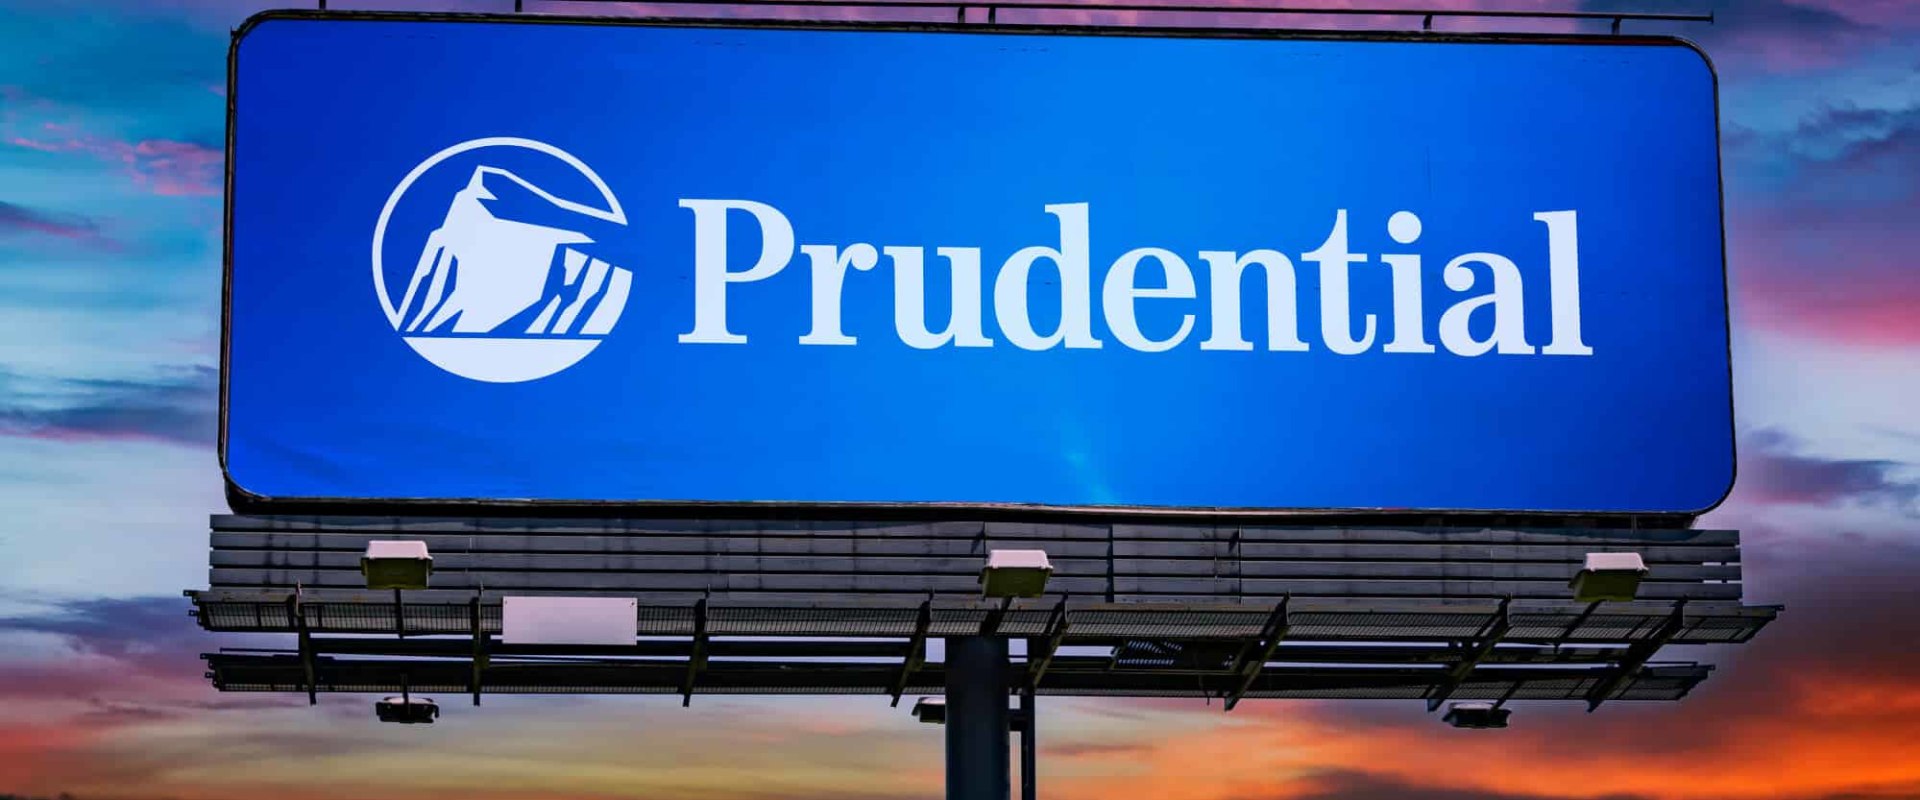 prudential life insurance company